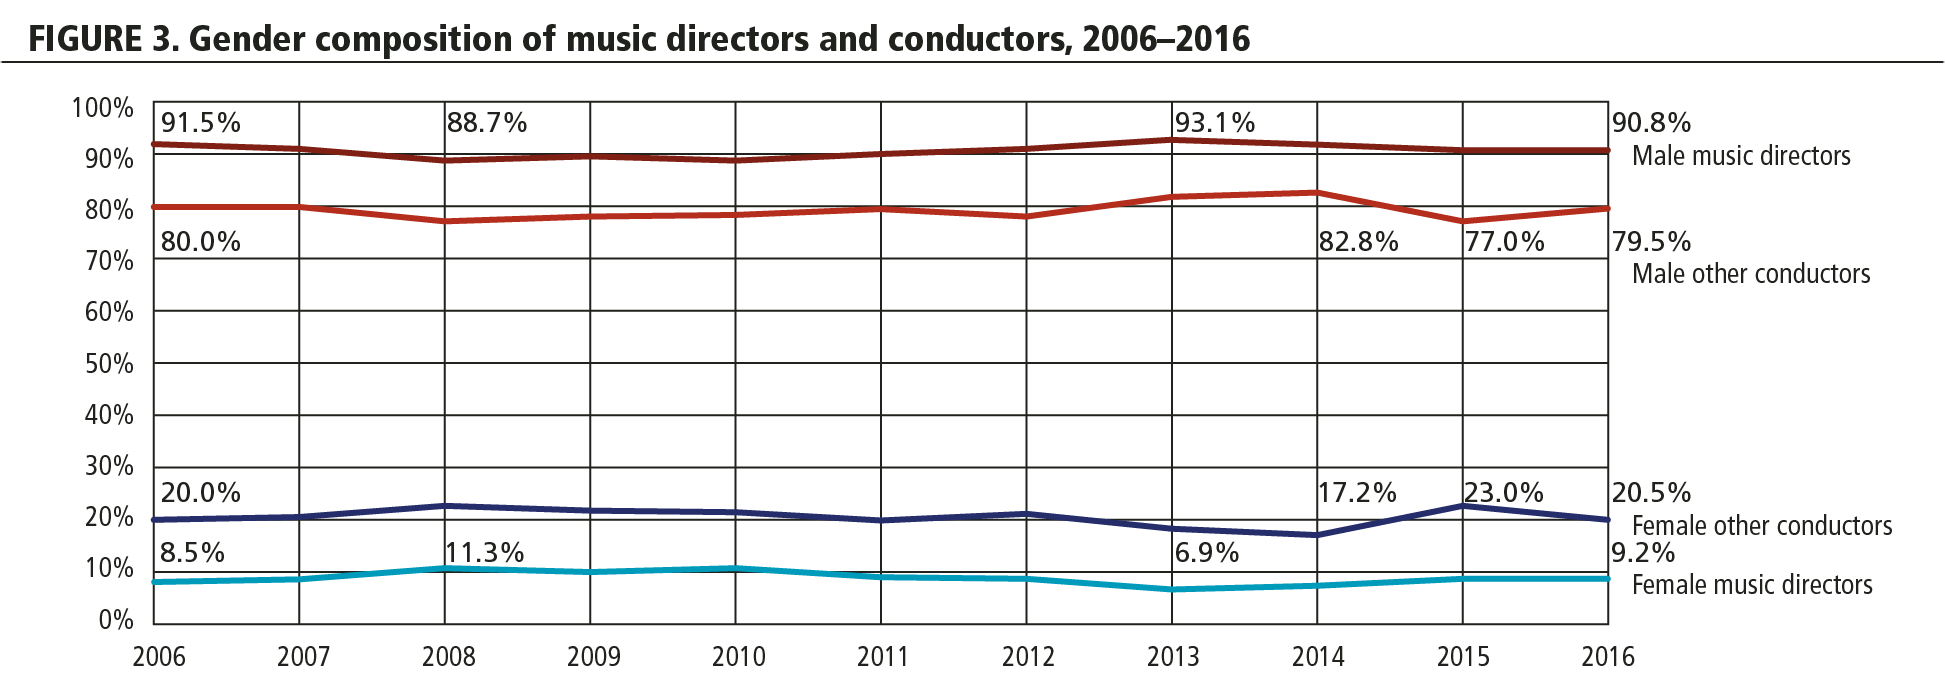 FIGURE 3. Gender composition of music directors and conductors, 2006-2016